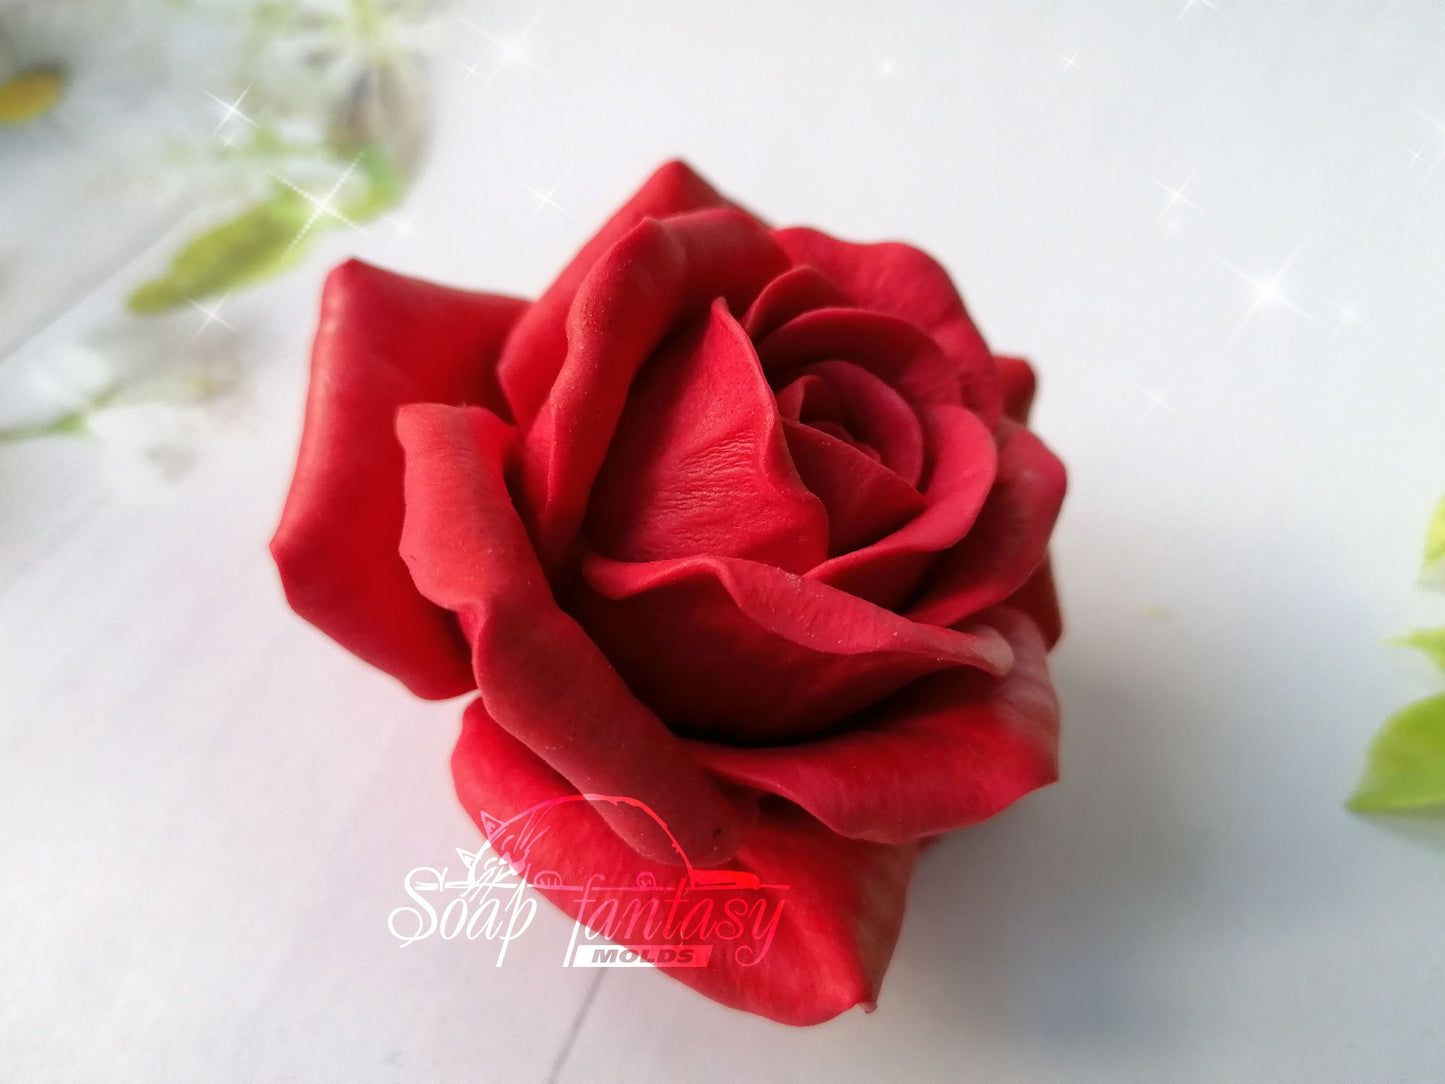 Big rose "Lady in red" silicone mold for soap making